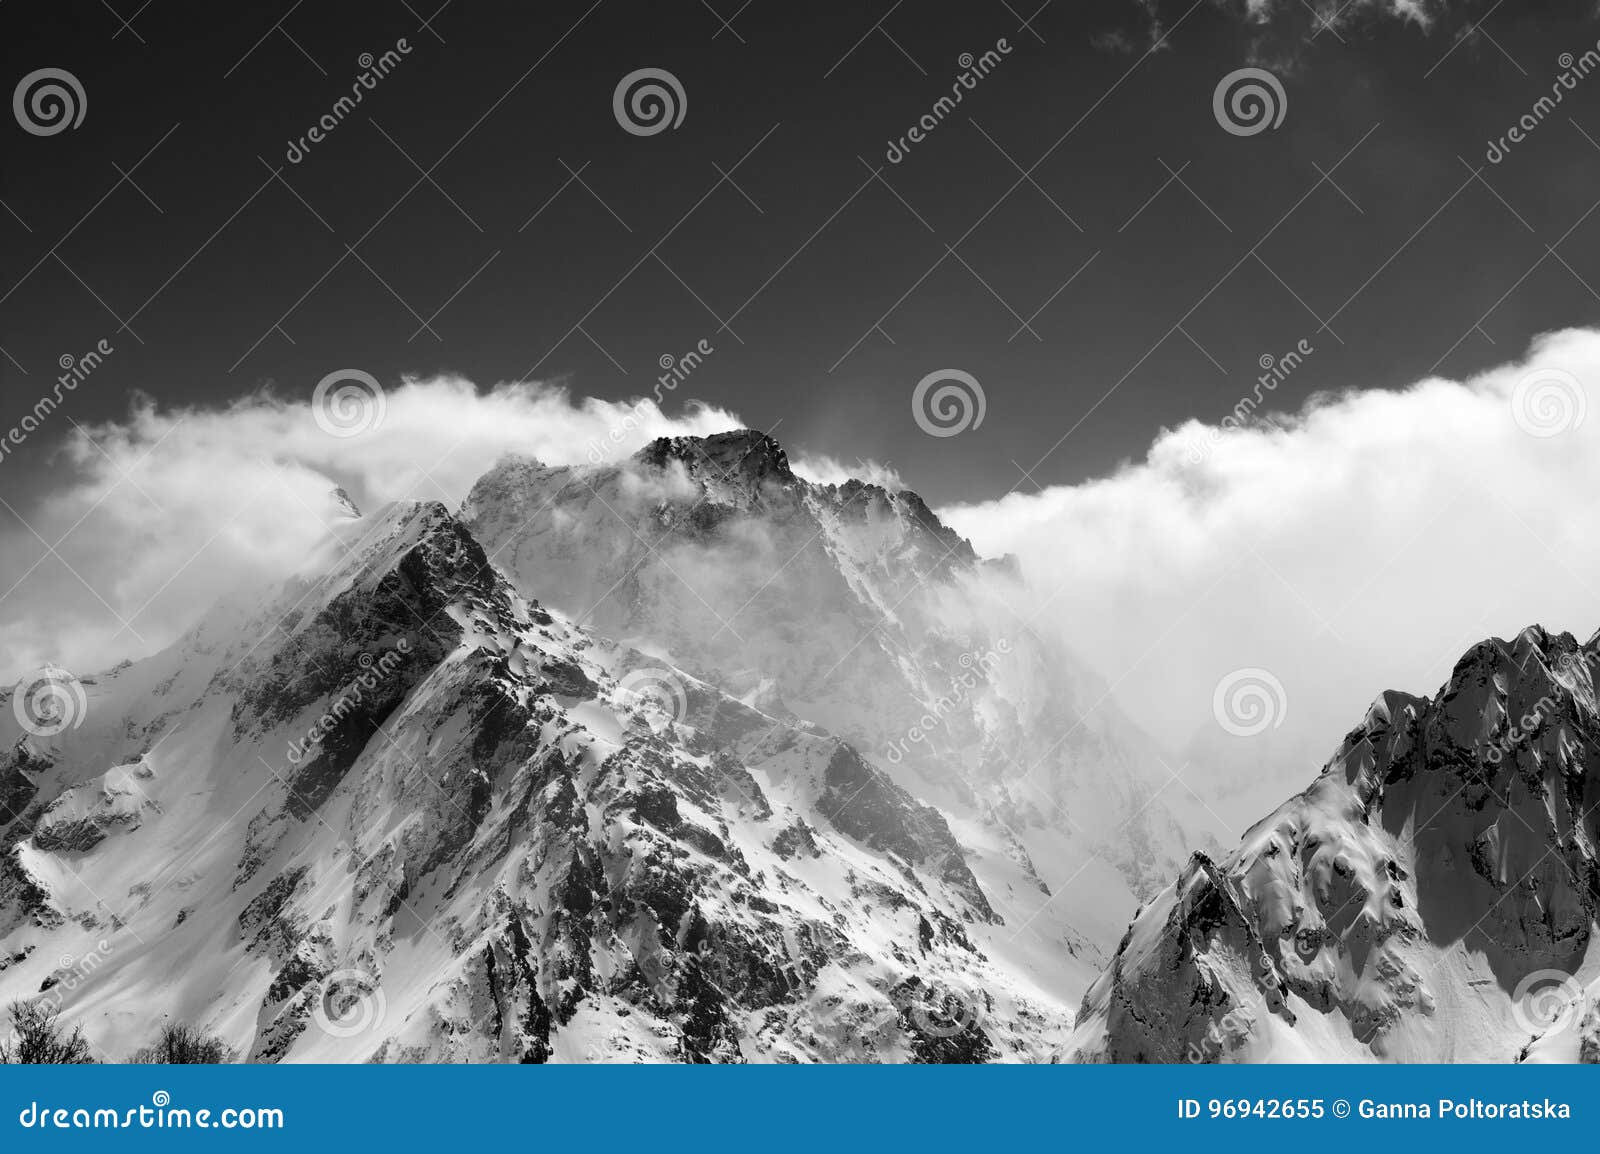 Black and White View on Snow Winter Mountains in Clouds Stock Image ...